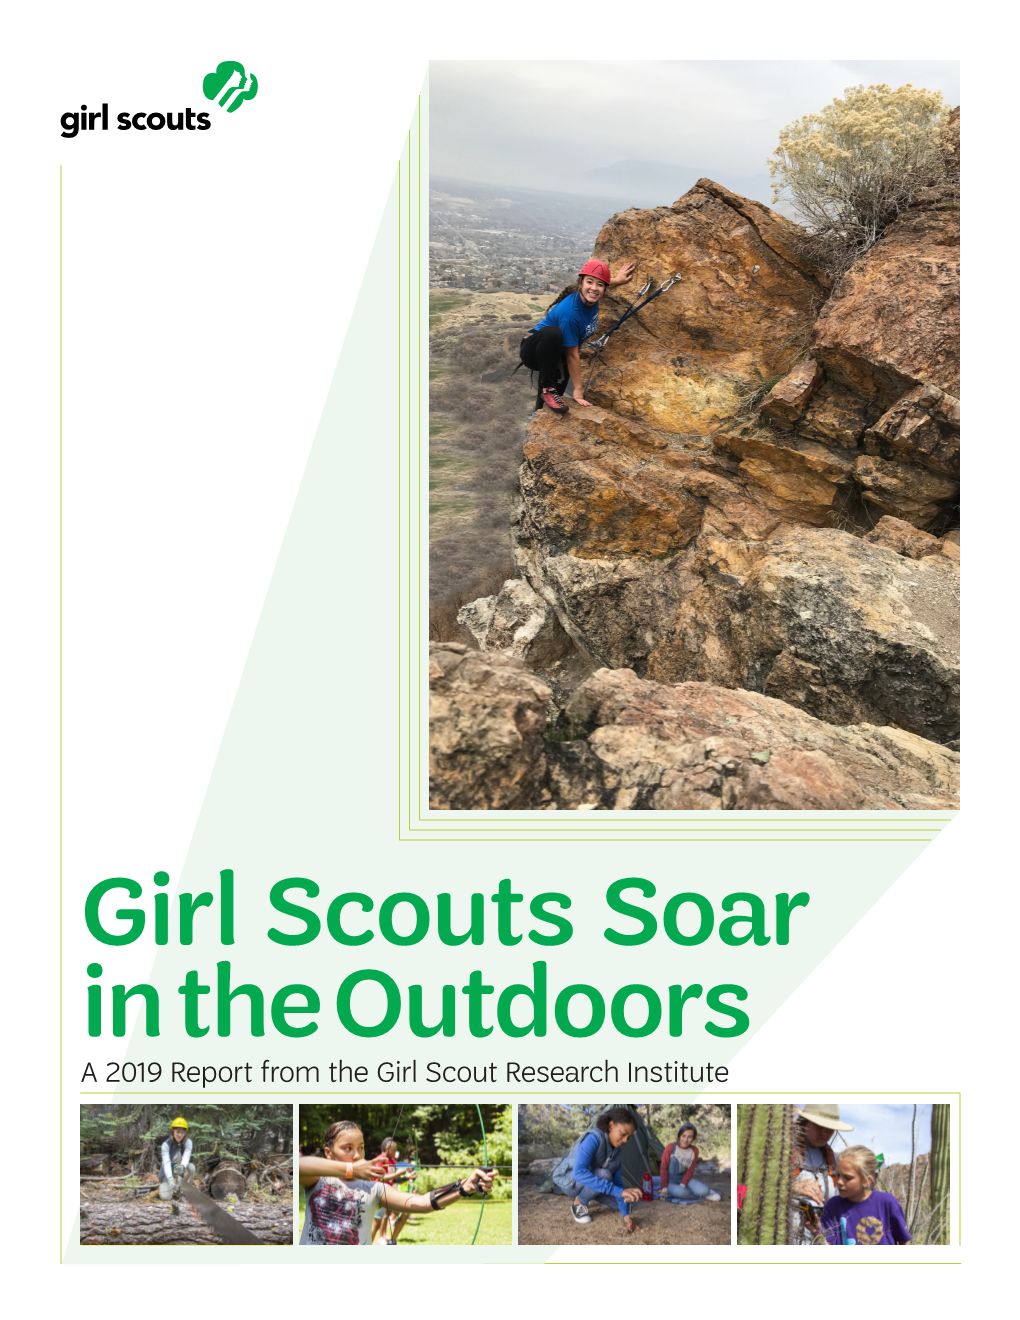 Girl Scouts Soar in the Outdoors a 2019 Report from the Girl Scout Research Institute Or Over 100 Years, Girls Have Discovered, 3